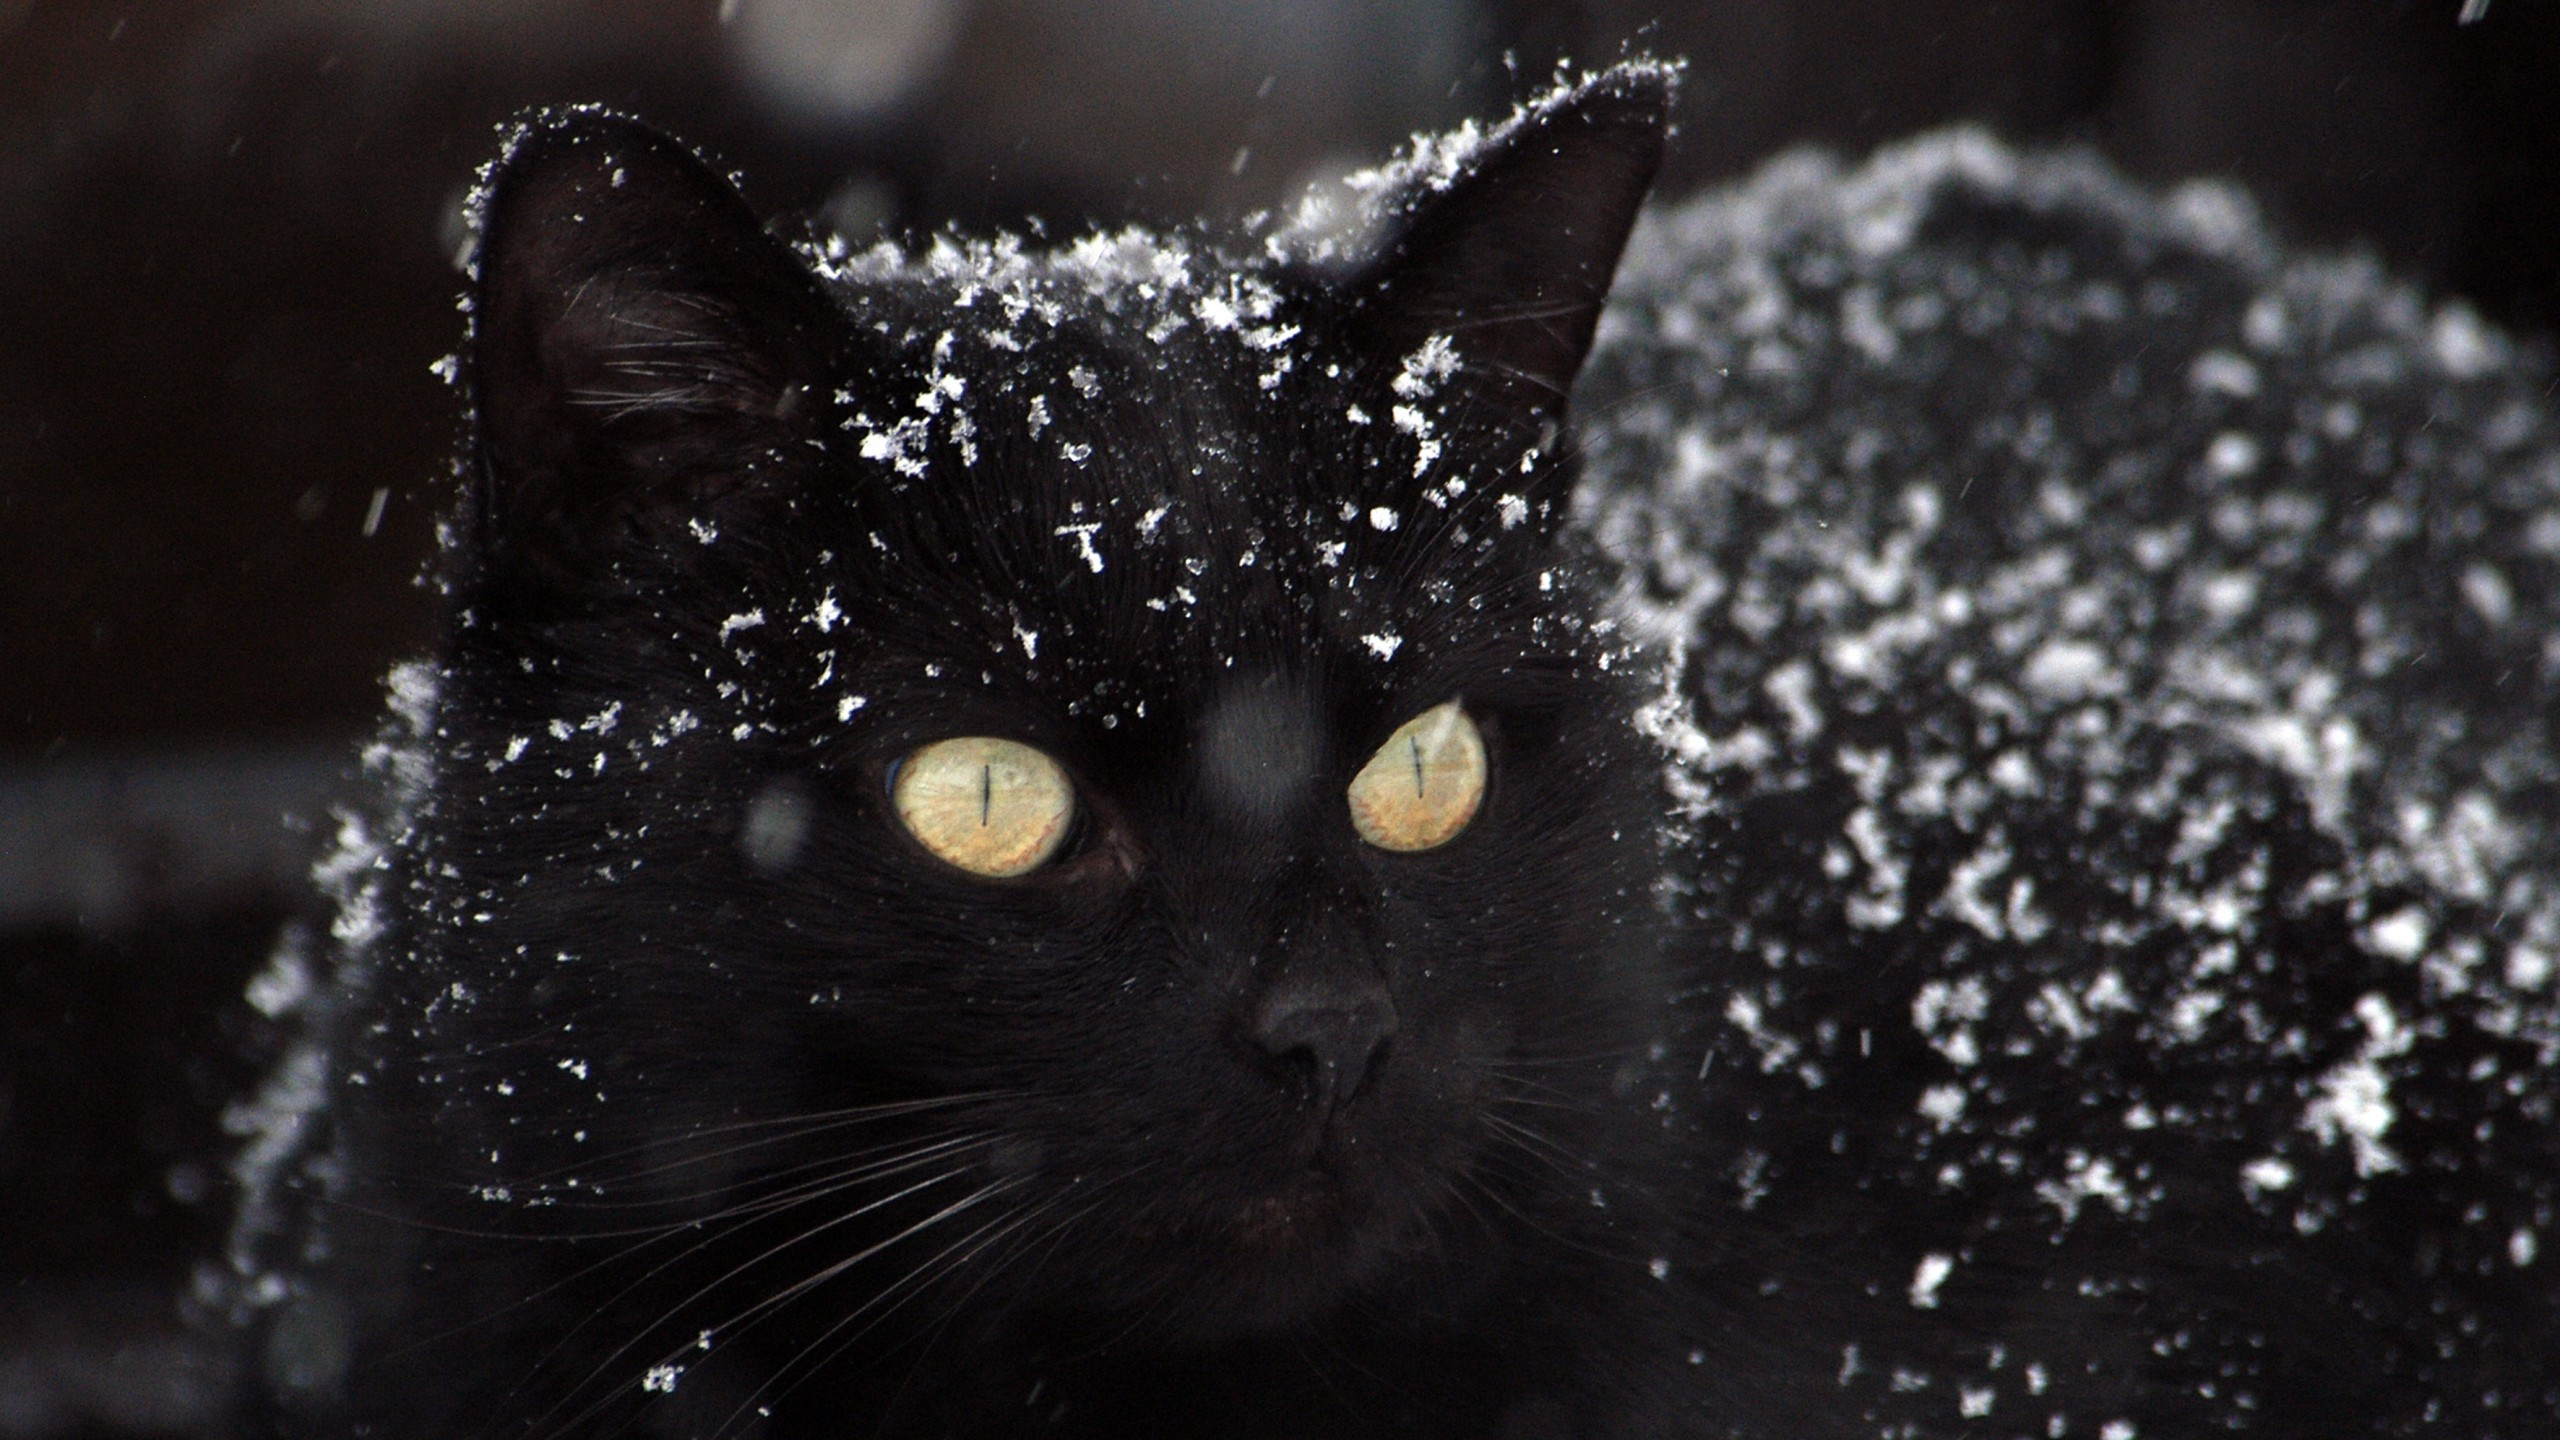 Download 2560x1440 Black Cat, Snow, Majestic Wallpaper for iMac 27 inch